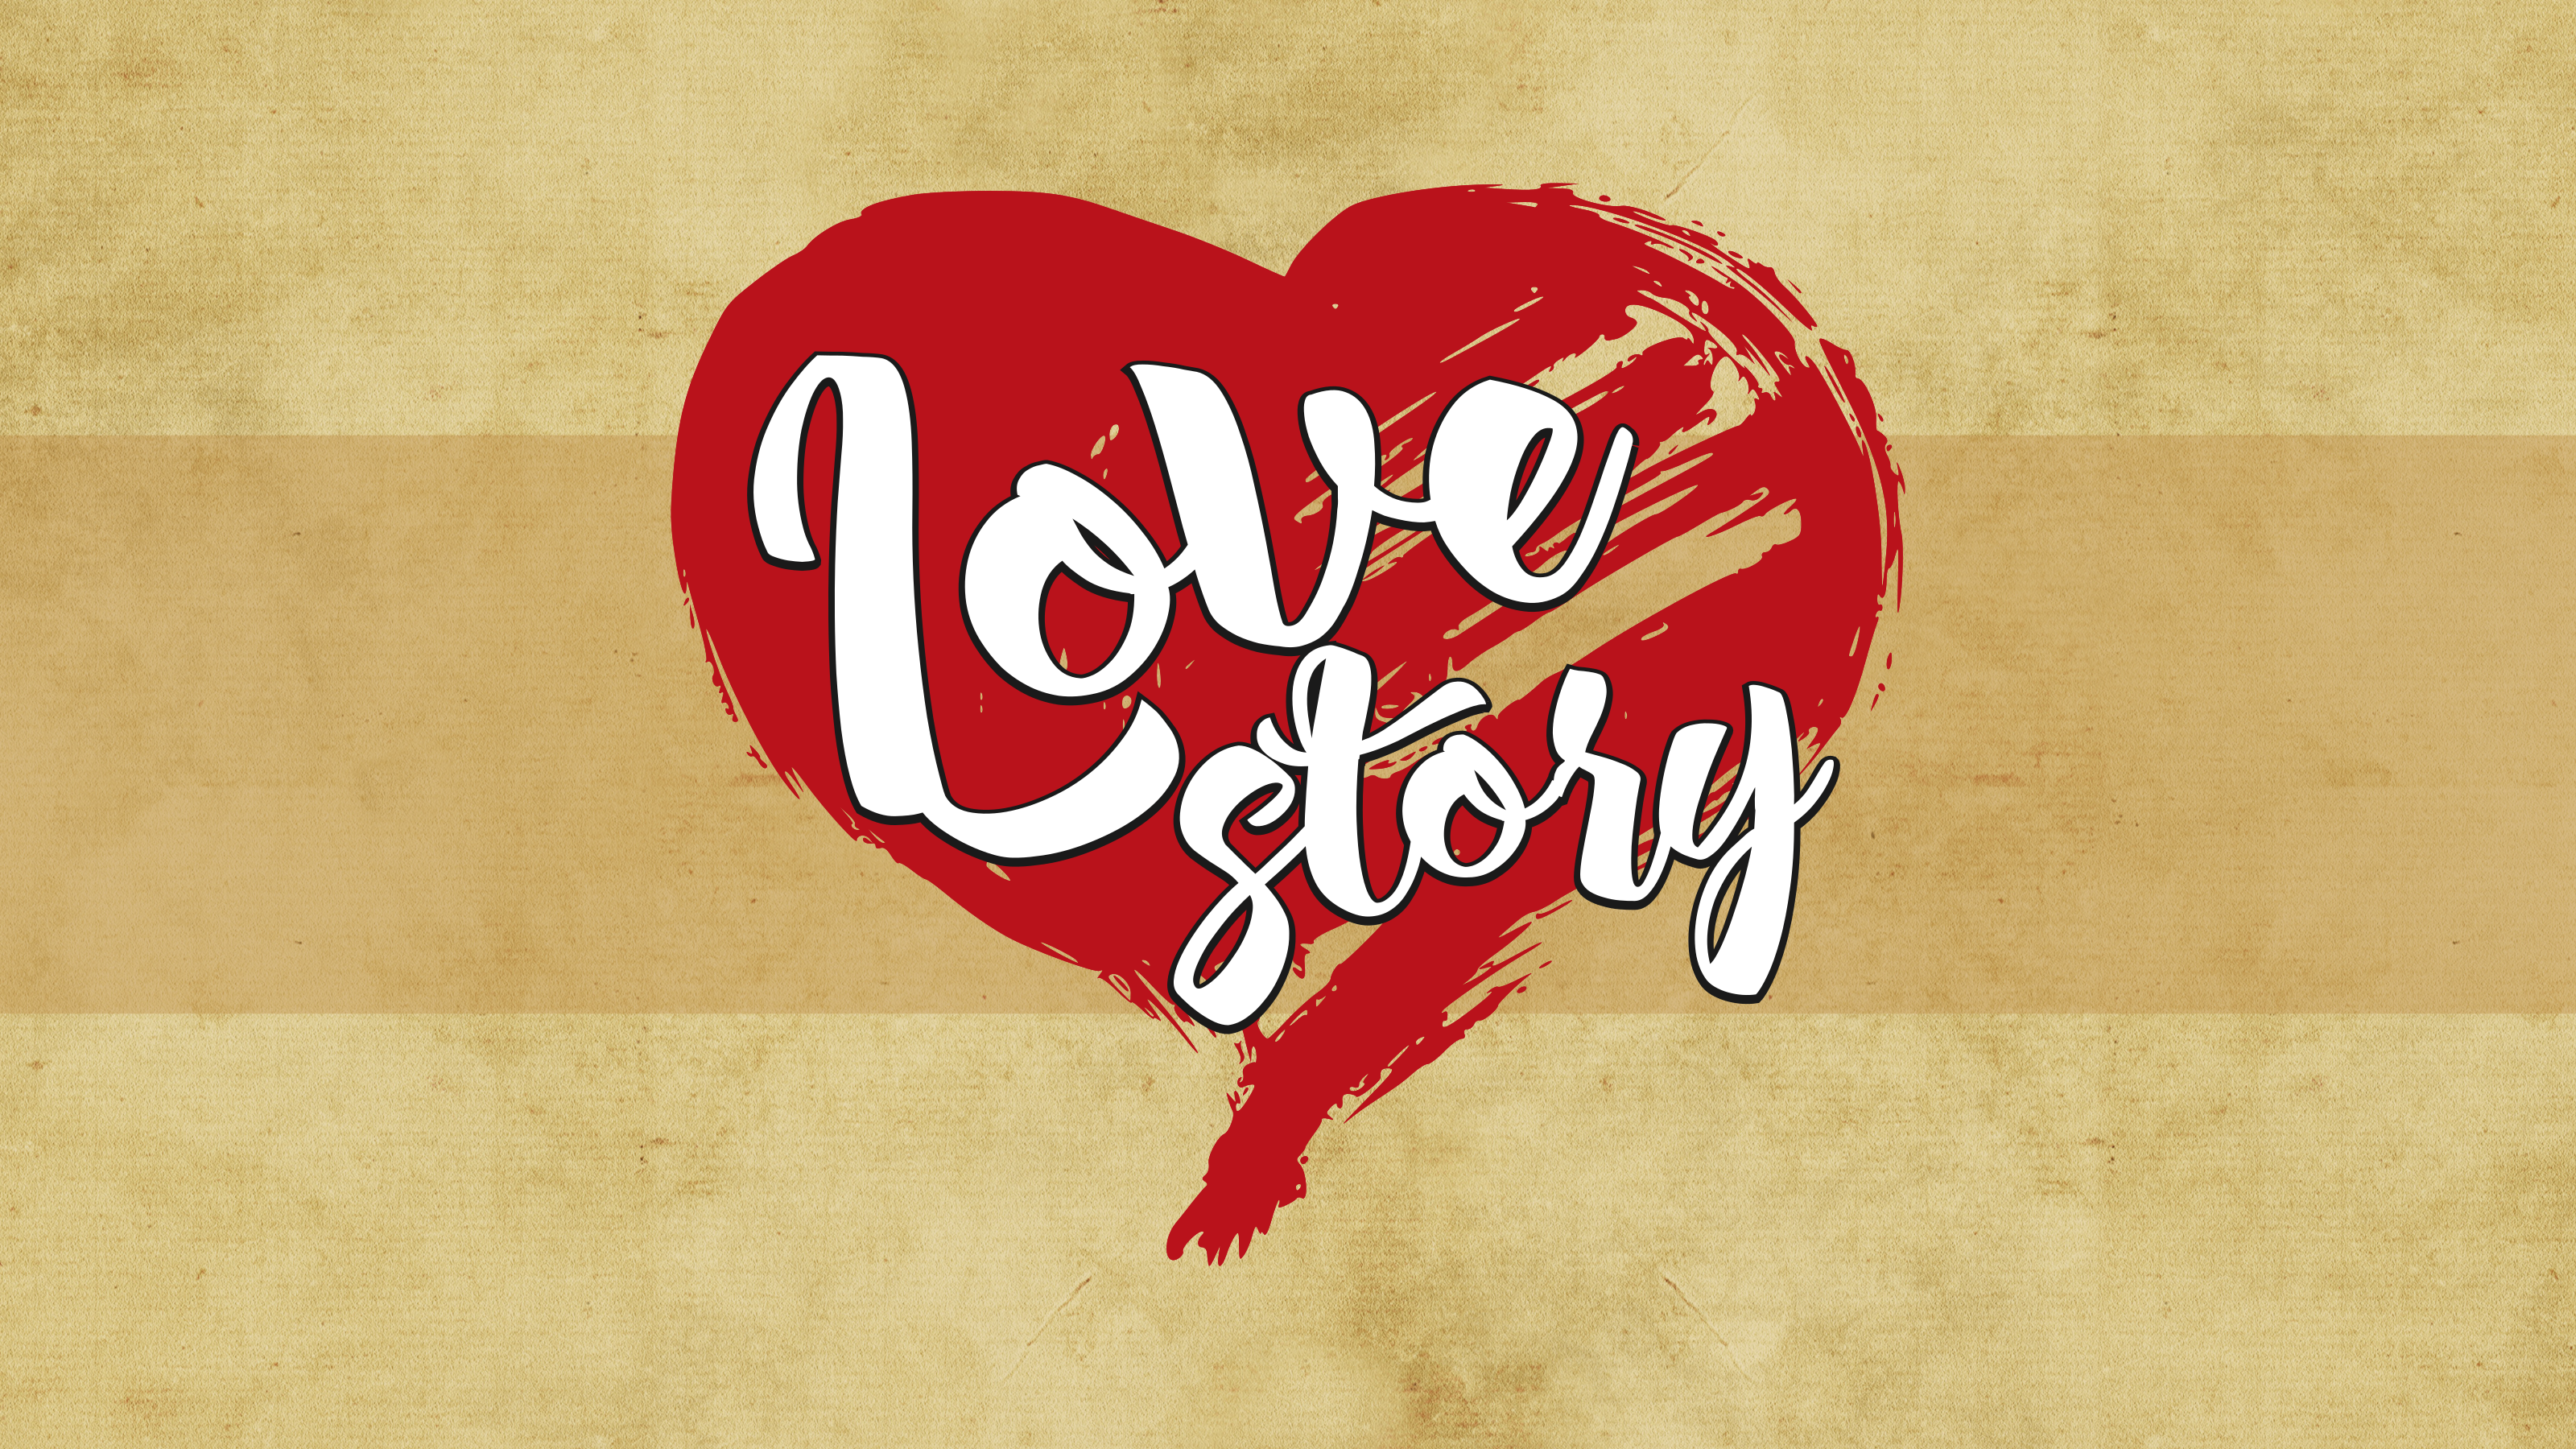 Heartedly - Classic Love Story Logo Stock Vector - Illustration of graphic,  design: 135799123